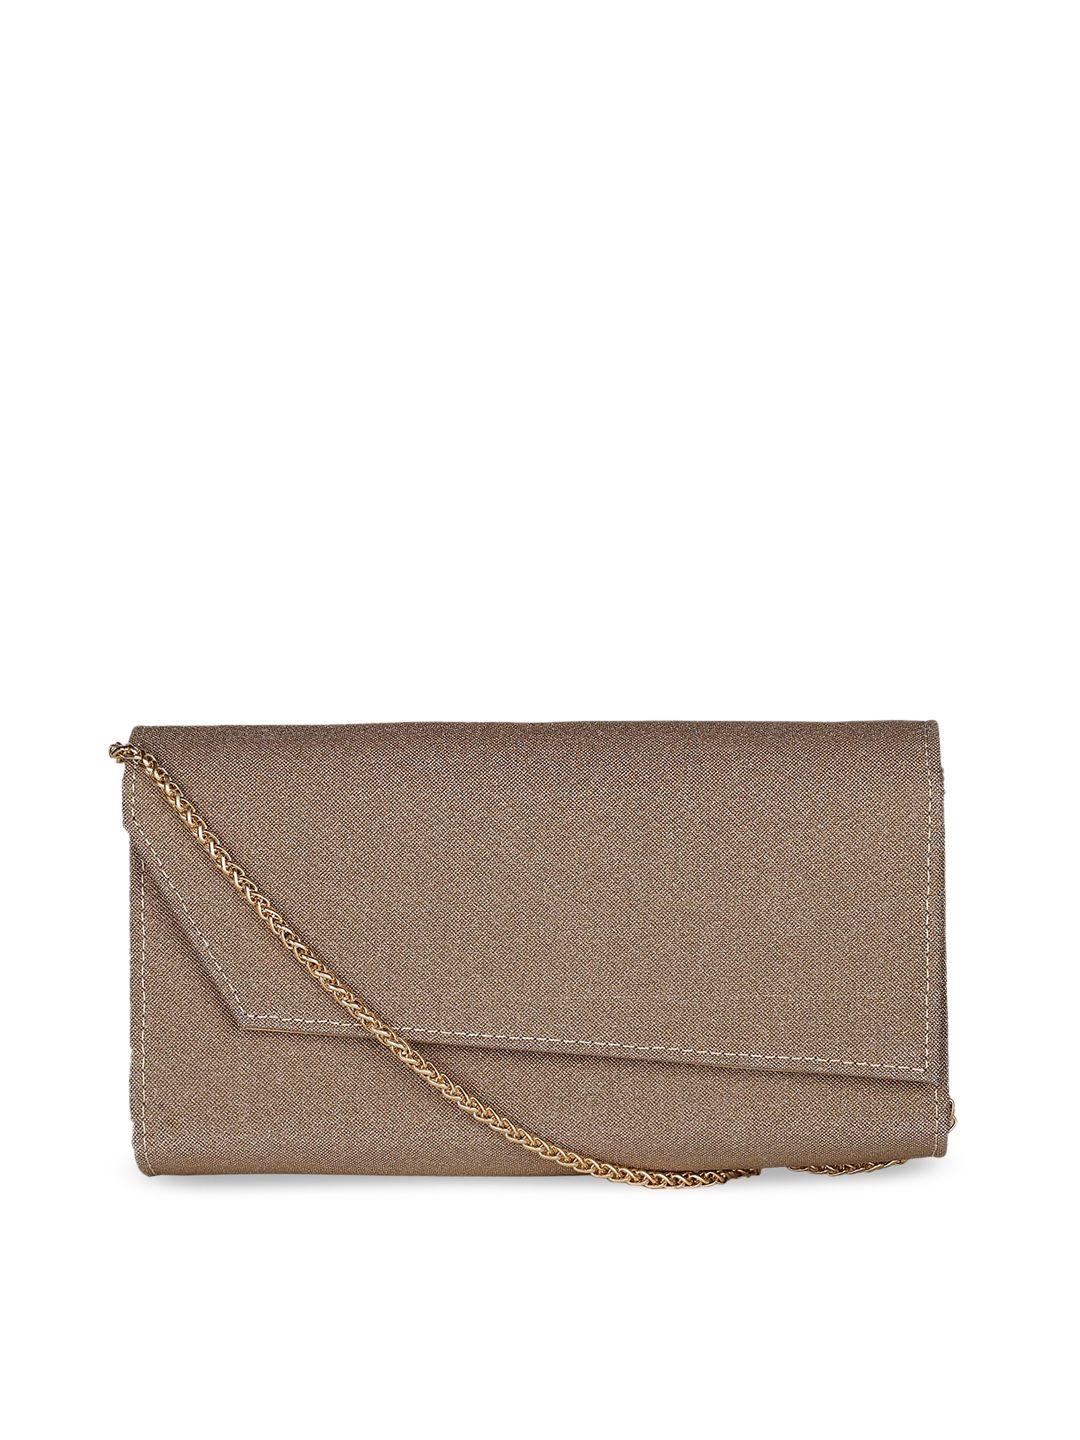 marie claire brown leather structured sling bag